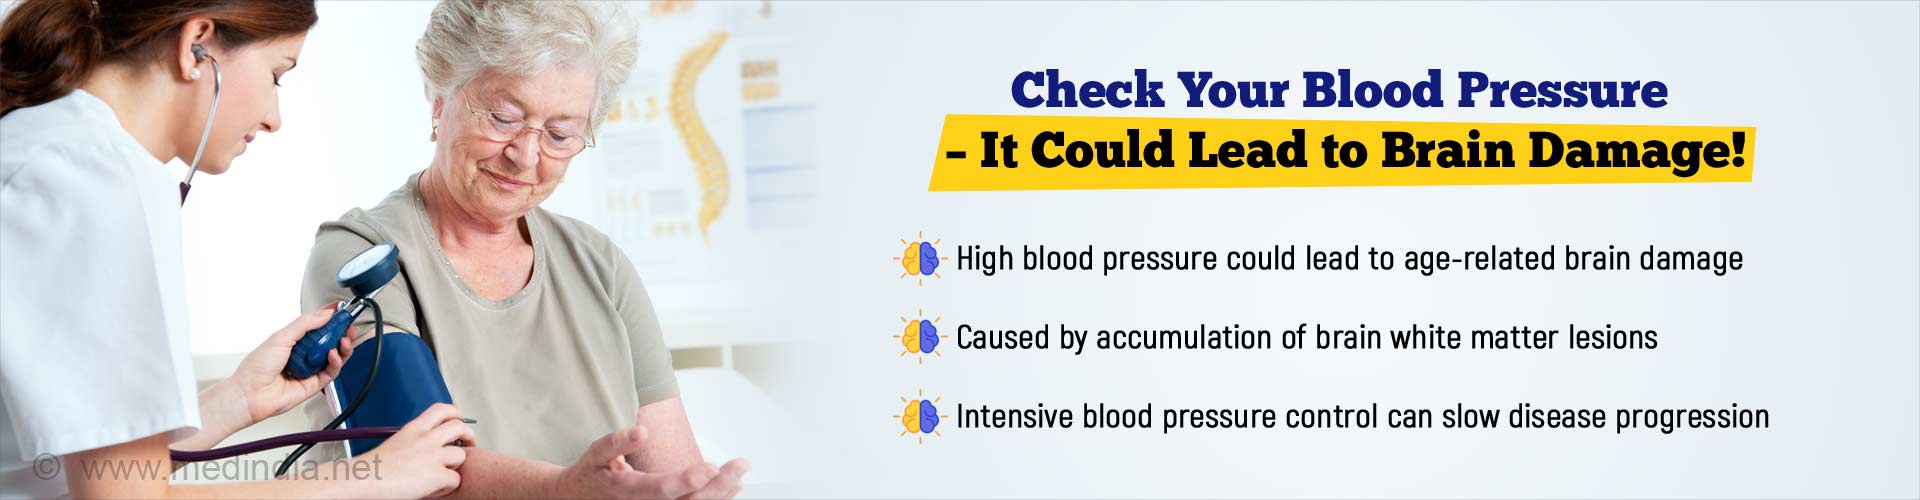 Check your blood pressure 